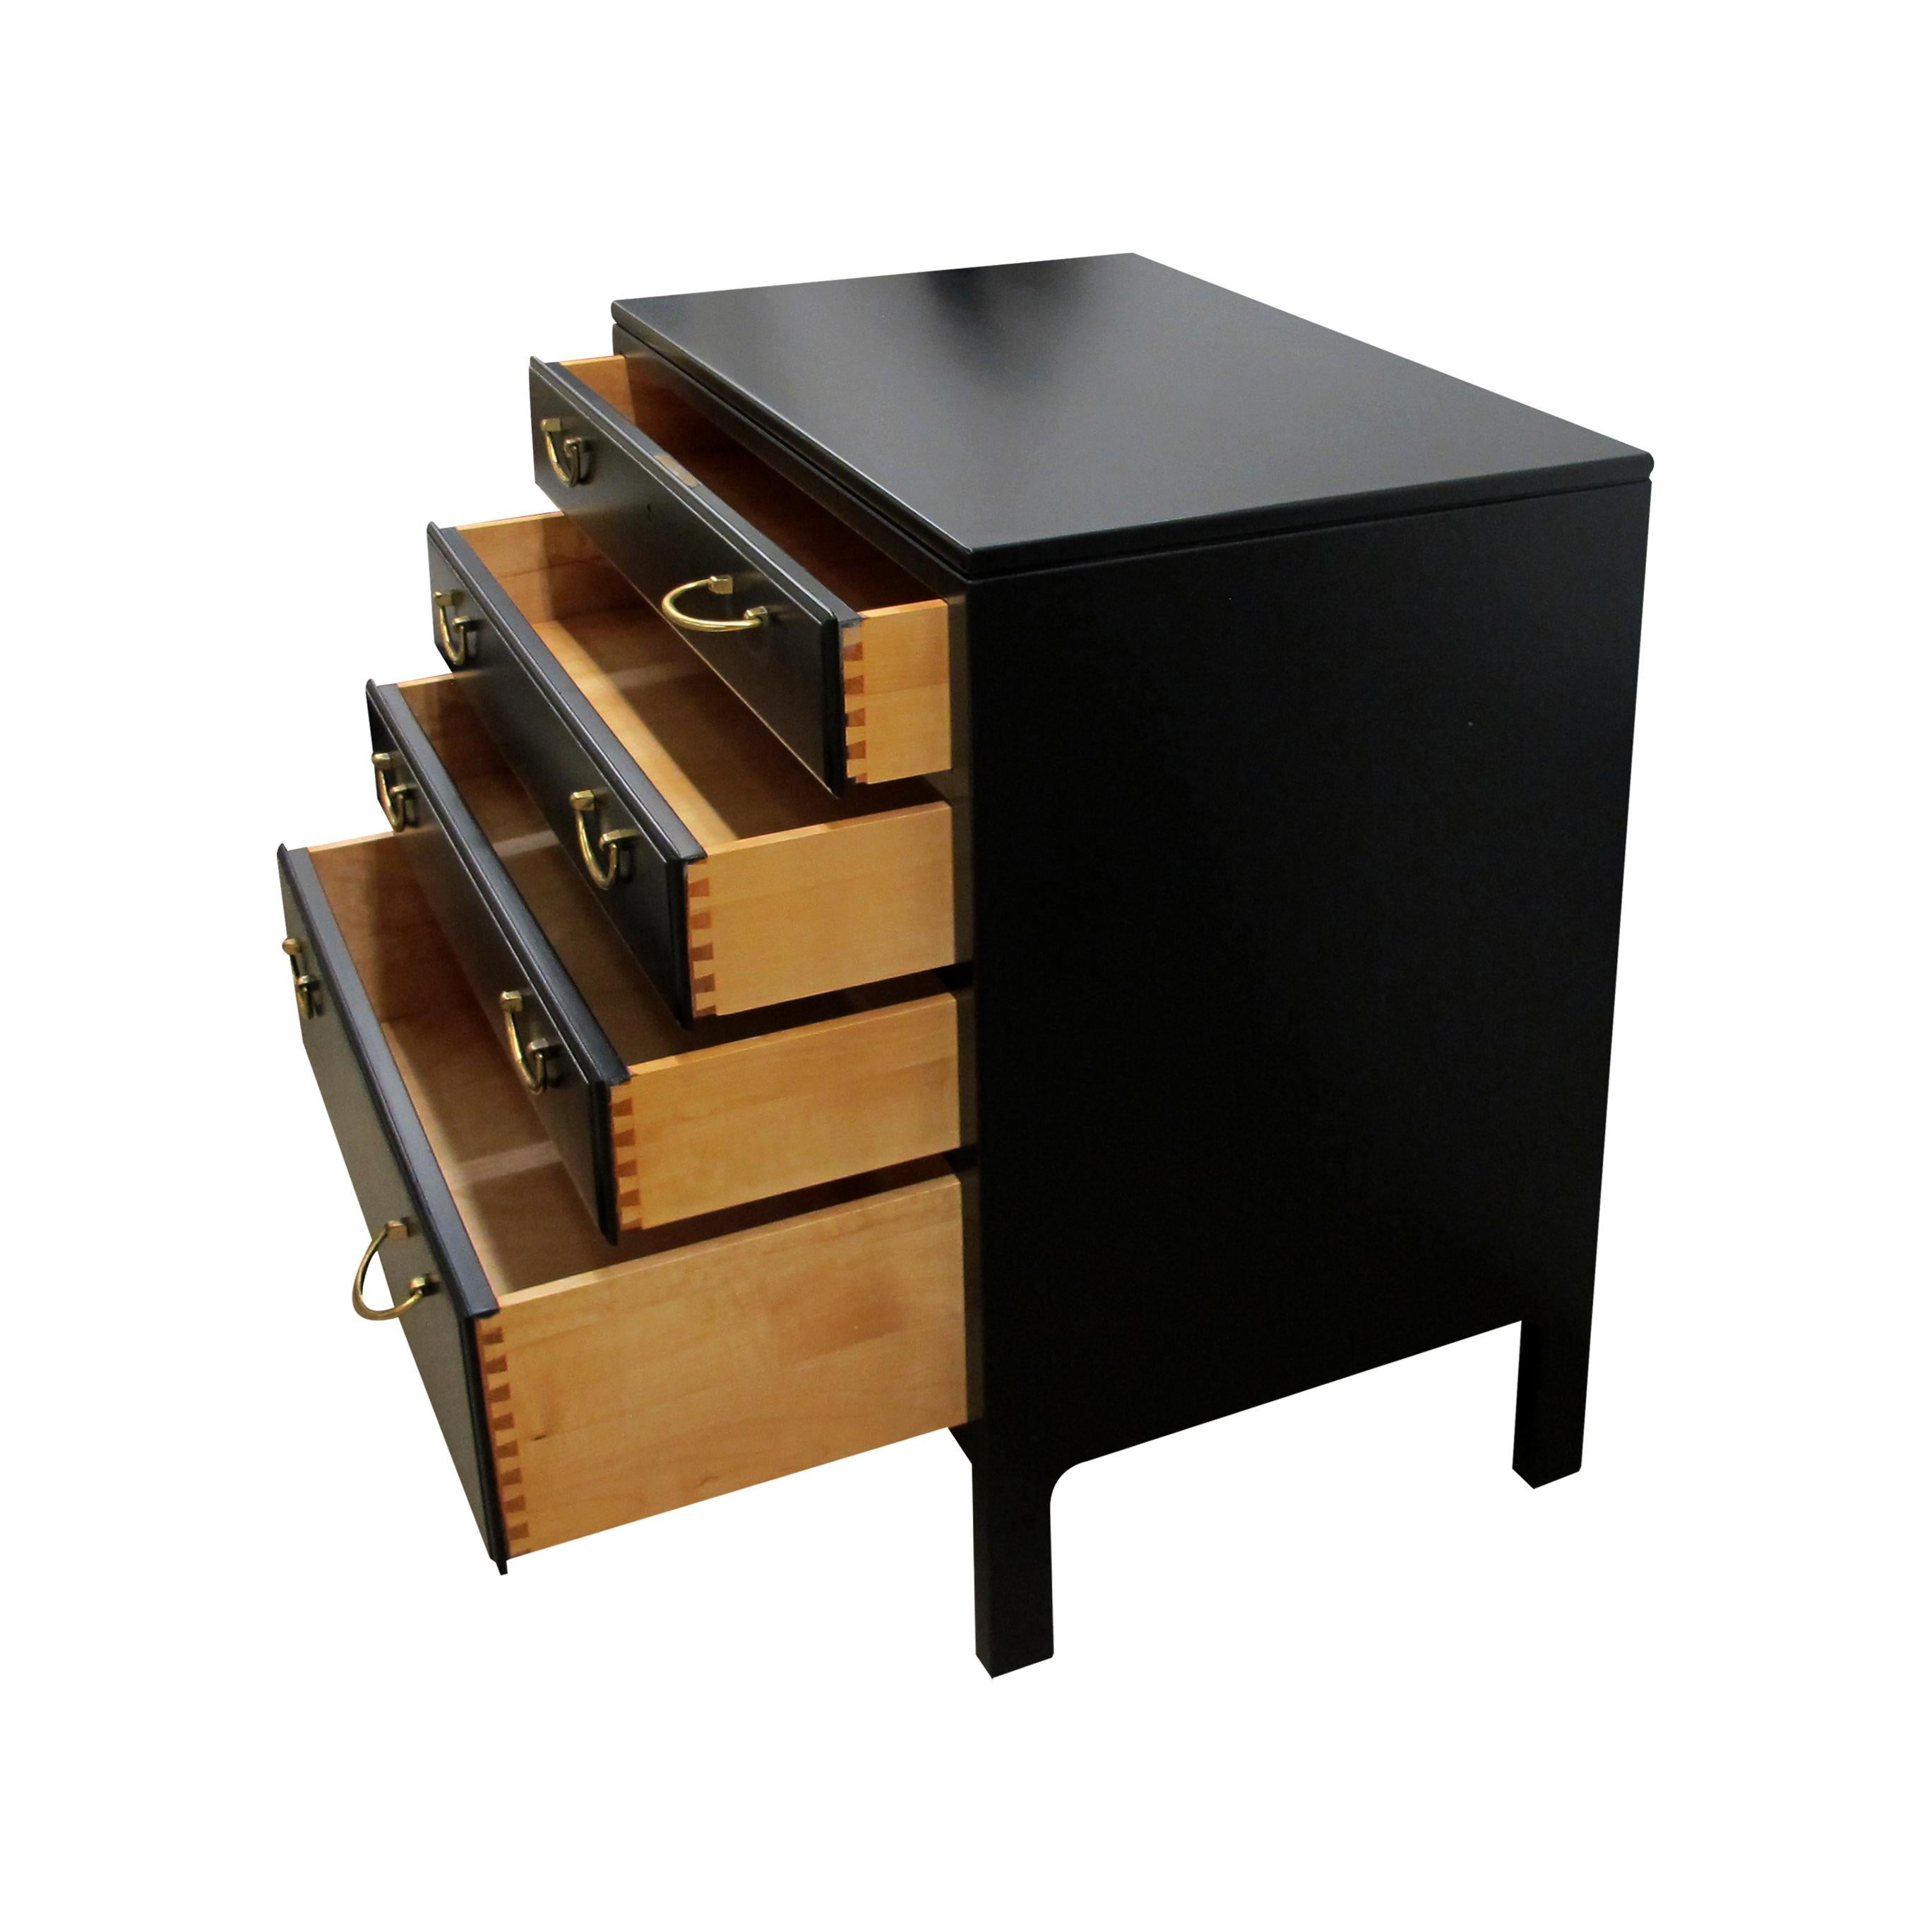 Other Pair of 1950s Swedish Ebonised Chest of Drawers by David Rosen for Bodafors